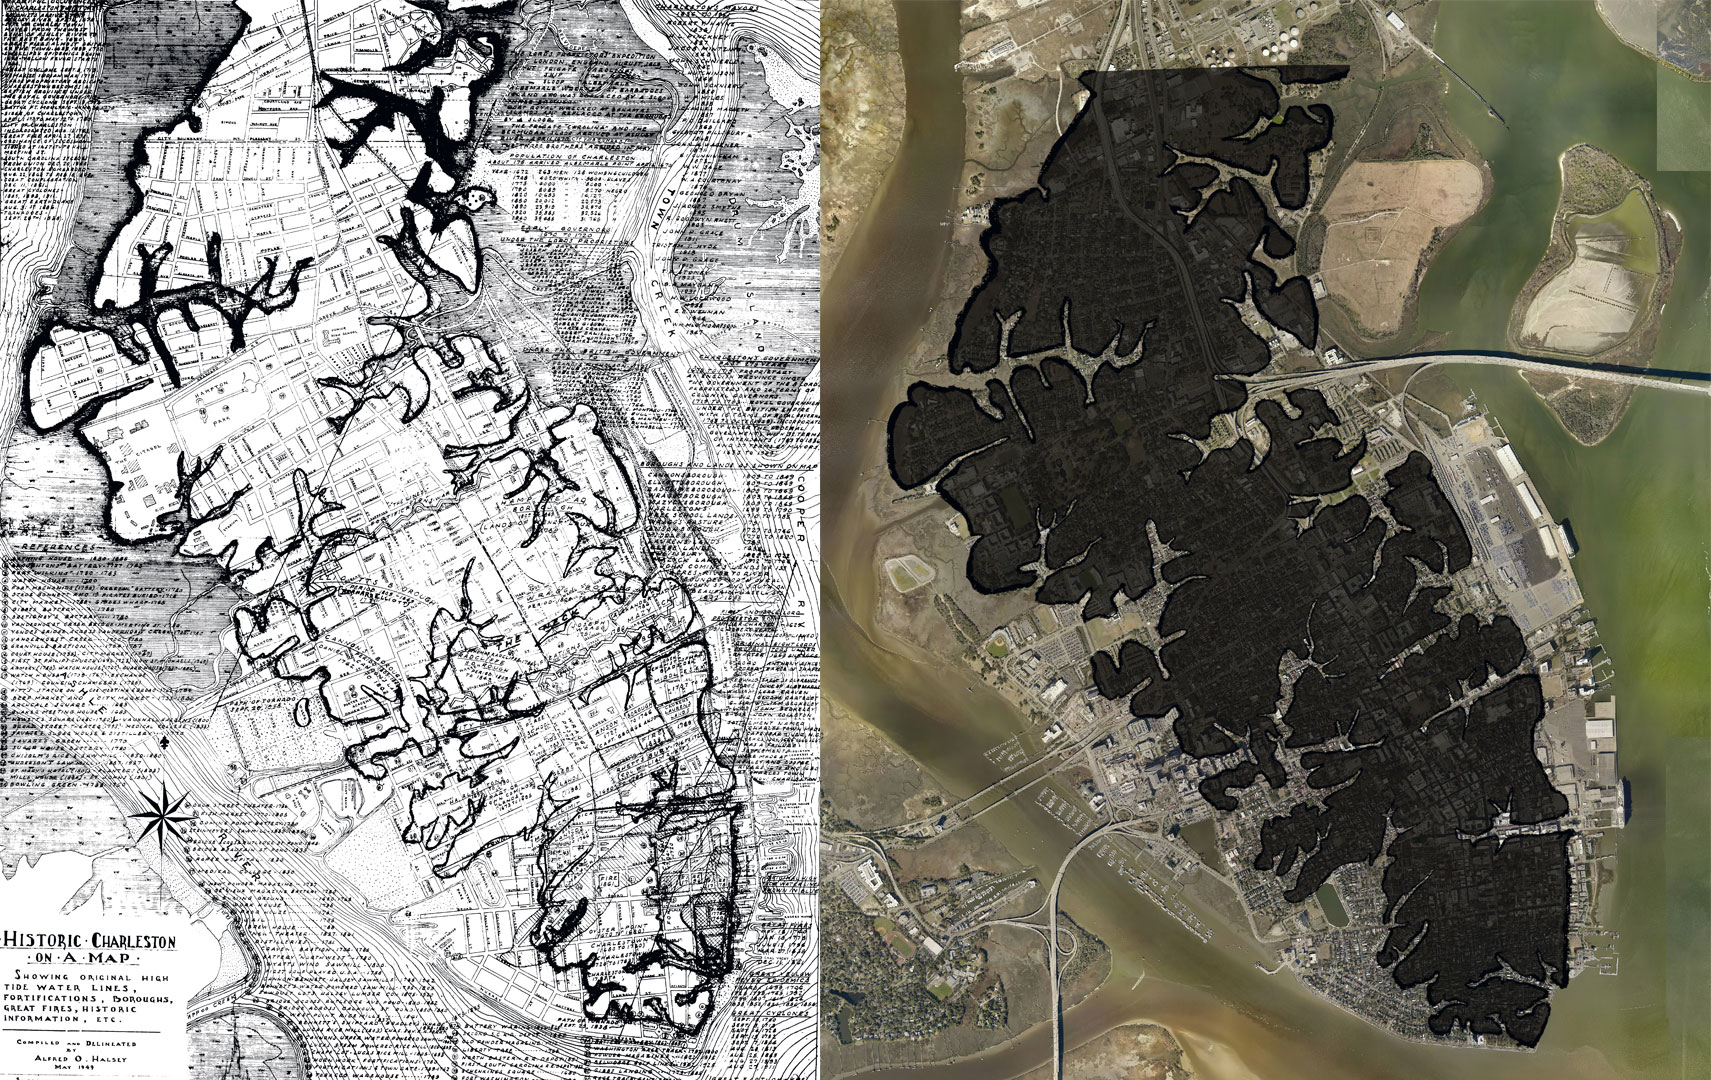 A historic Halsey Map (left) shows the original creek bed lines on the peninsula, and (right) the map is overlaid on a current aerial image, indicating areas that once were waterways. Images courtesy of the city of charleston Flooding & Sea Level rise Strategy, February 2019